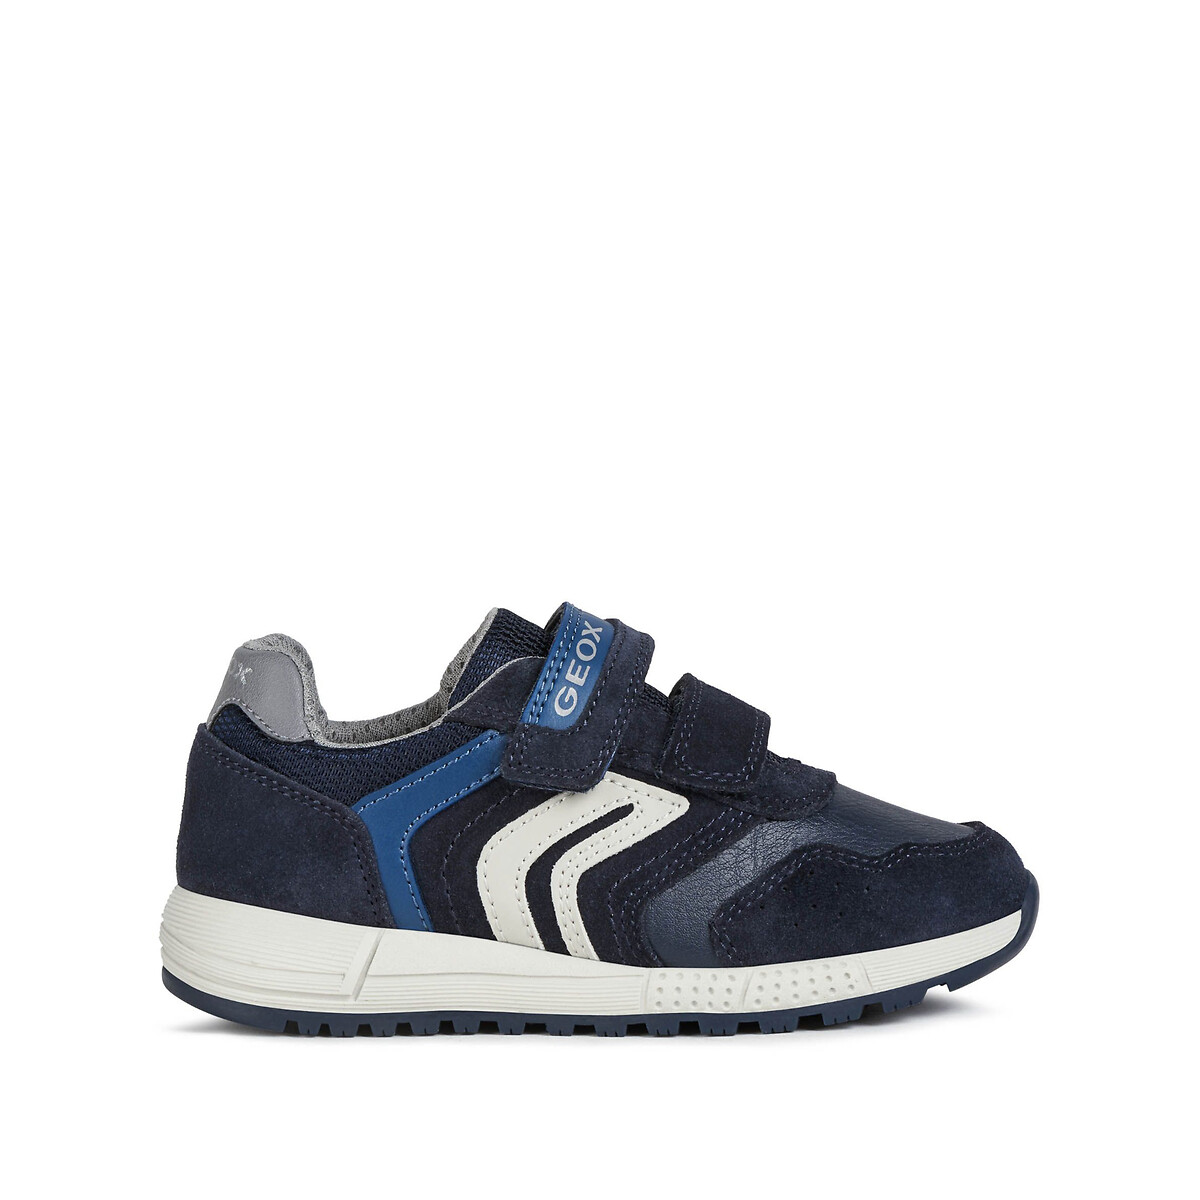 Kids Alben Breathable Trainers in Leather with Touch ’n’ Close Fastening